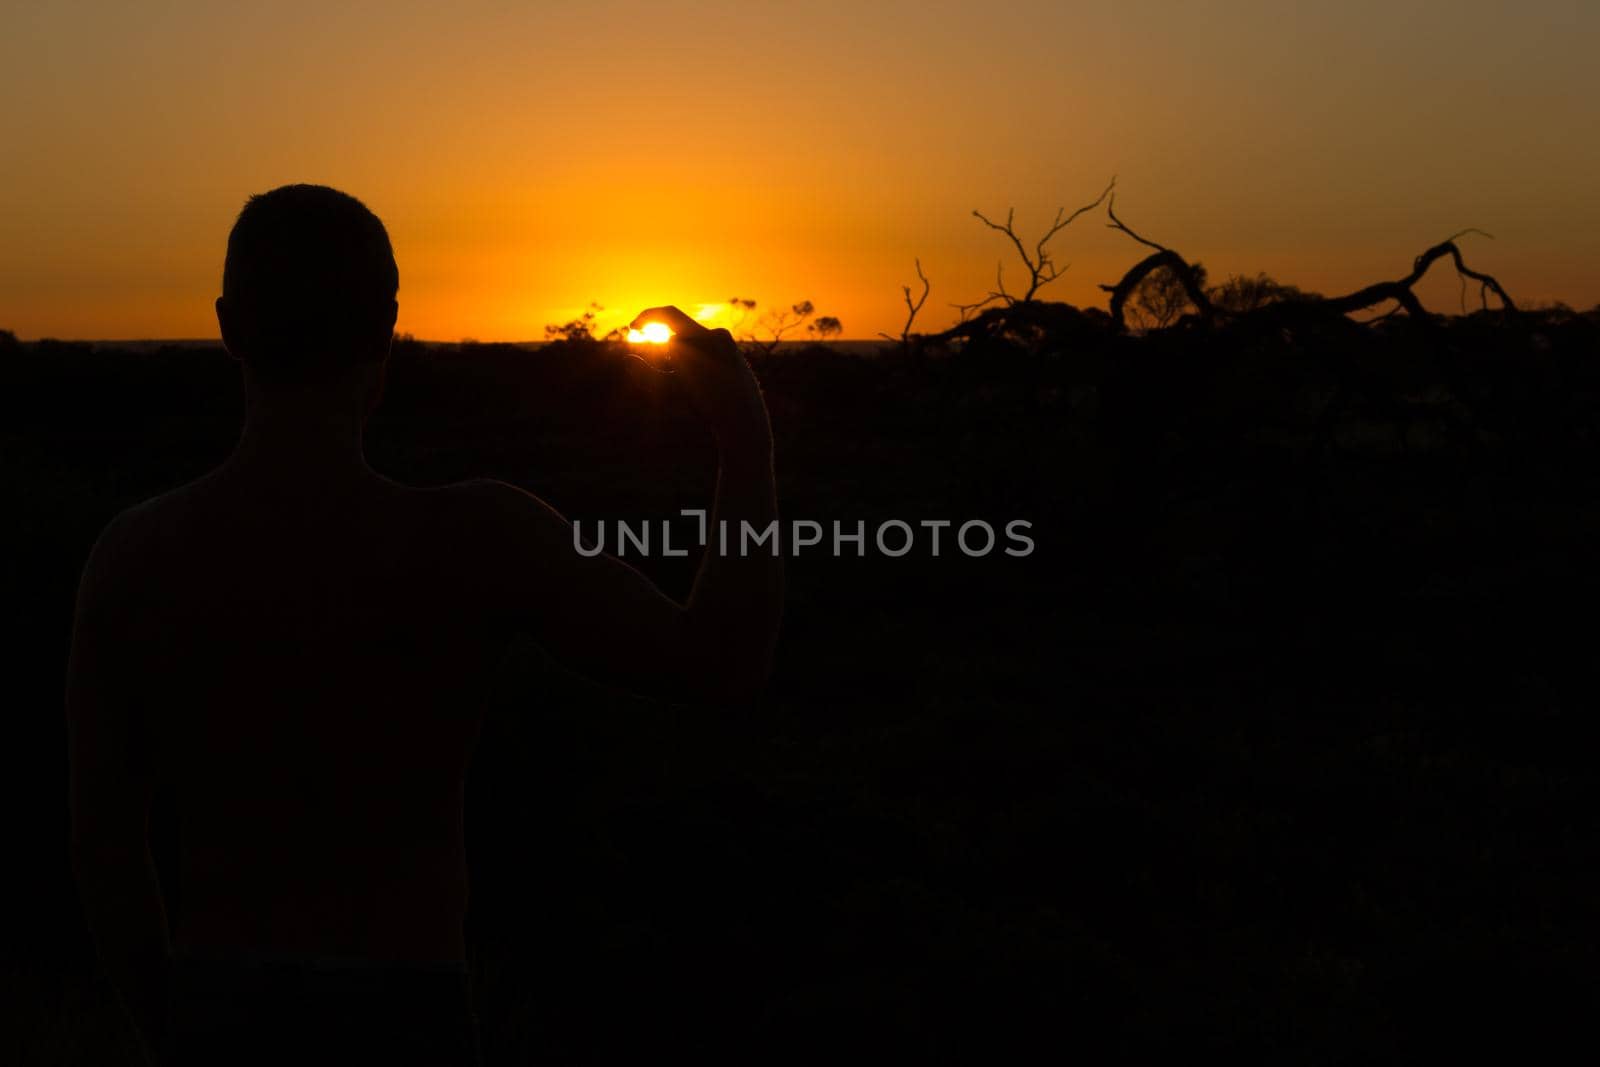 silhouette of young man holding sun during sunset in outback South Australia, Australia